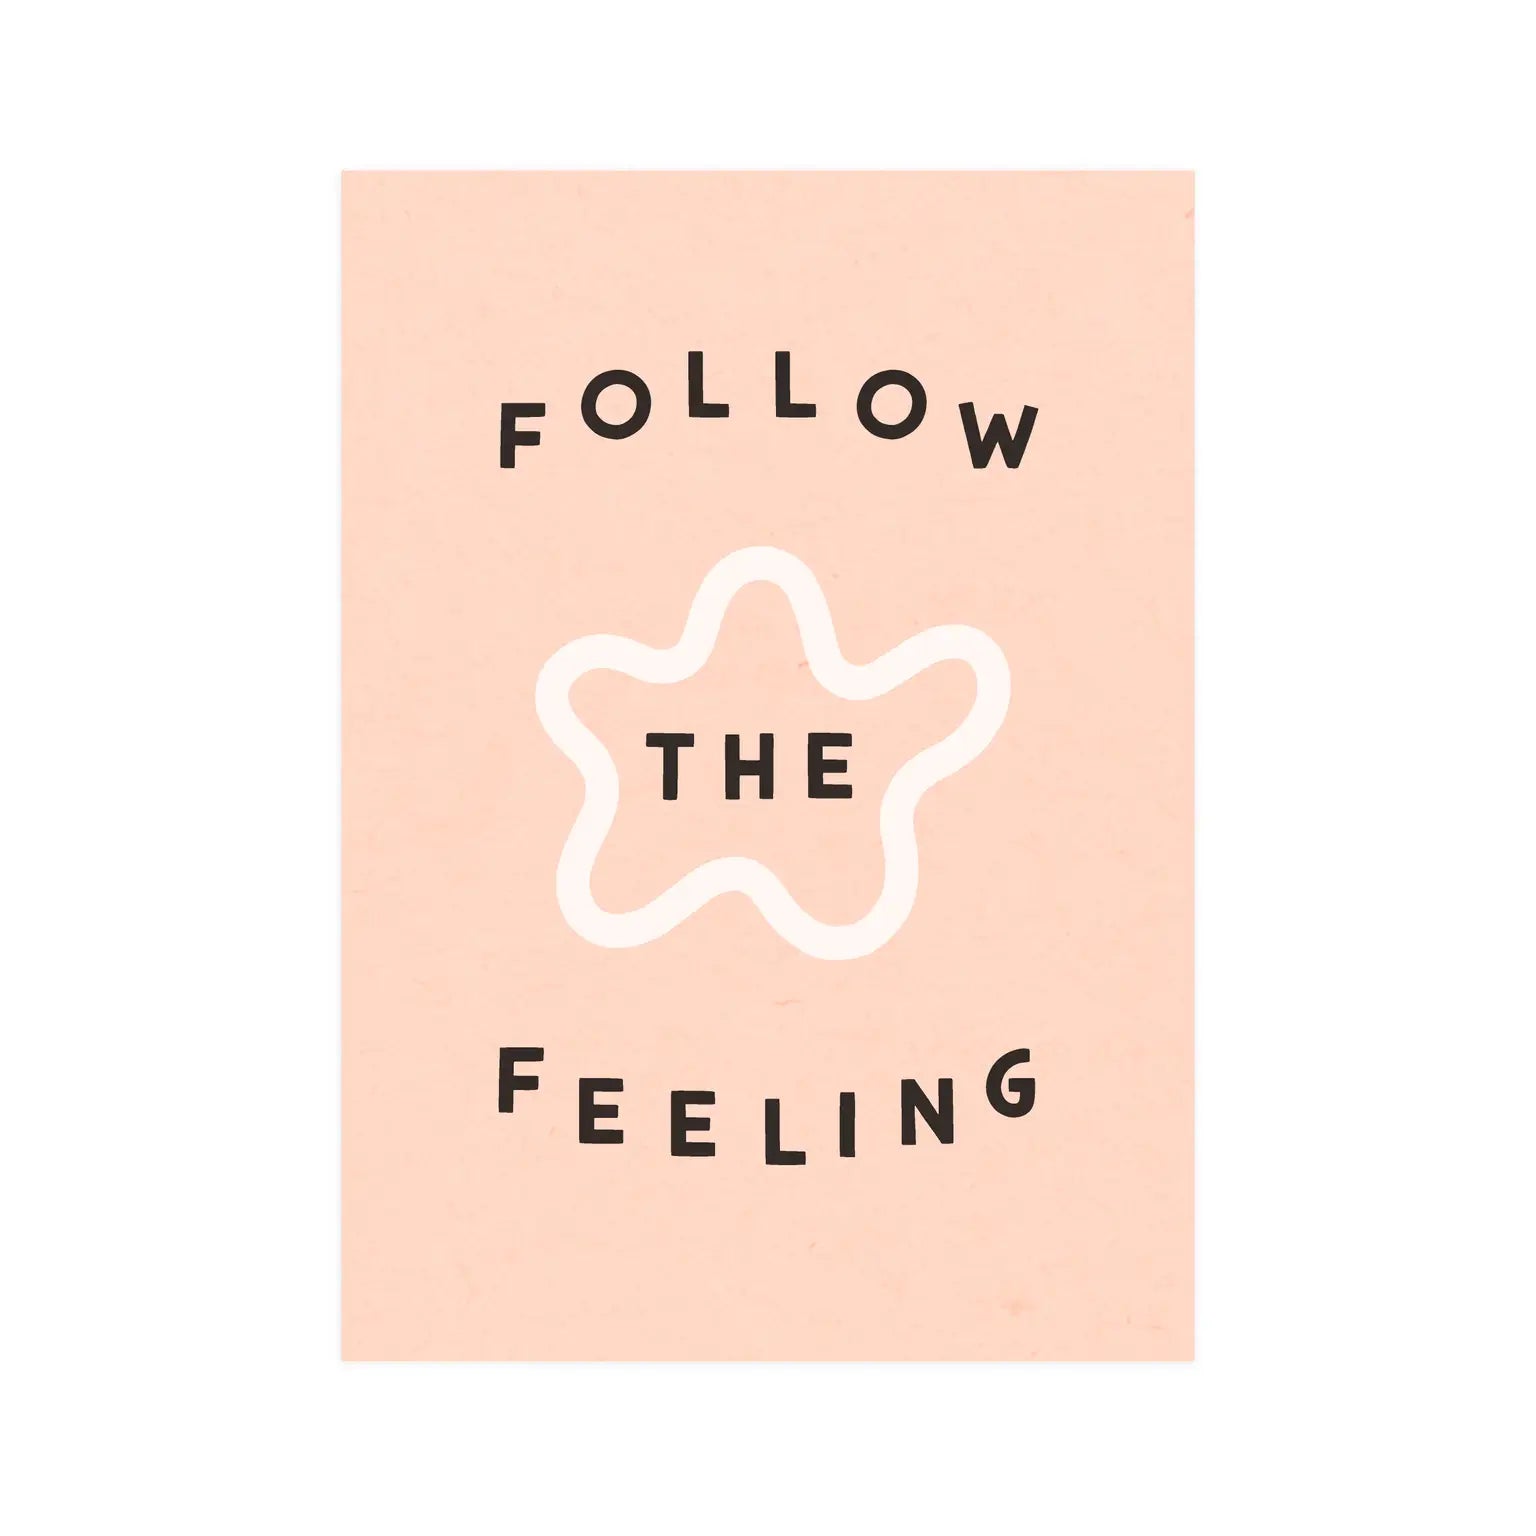 Light pink background. Abstract white flower. Black text reads "follow the feeling"